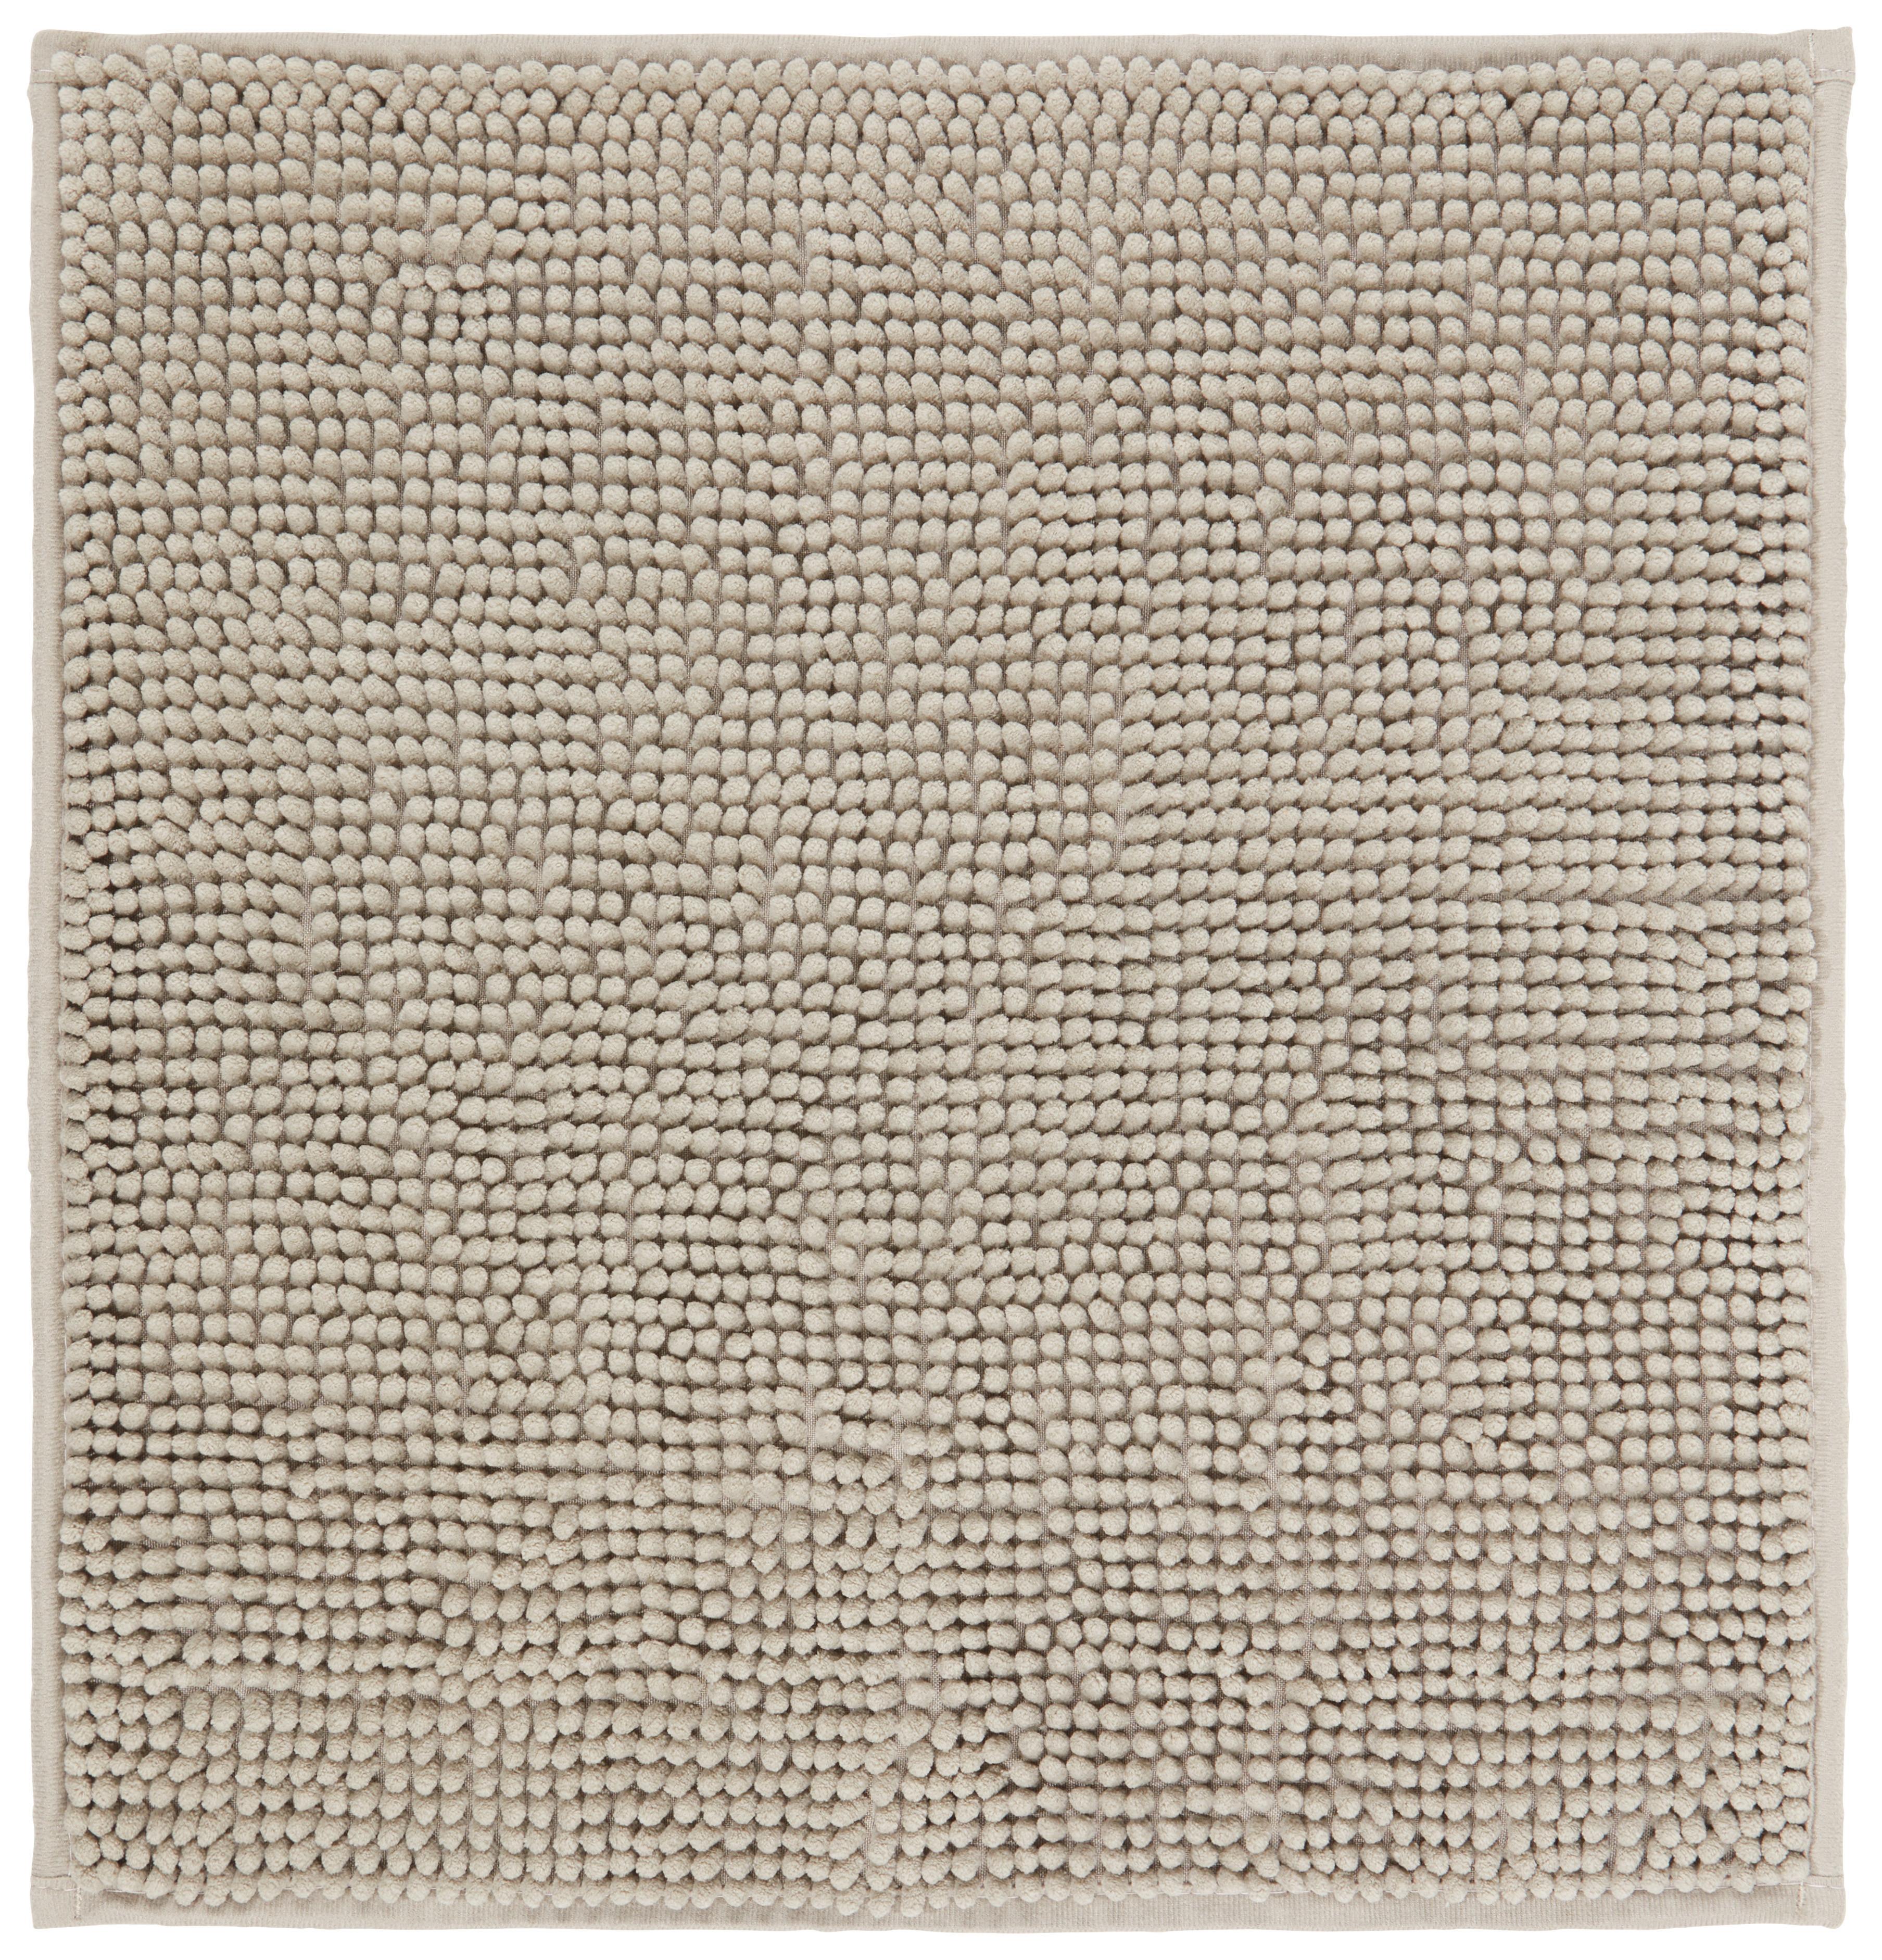 Badematte Nelly in Taupe ca. 50x50cm - Taupe, Textil (50/50cm) - Modern Living